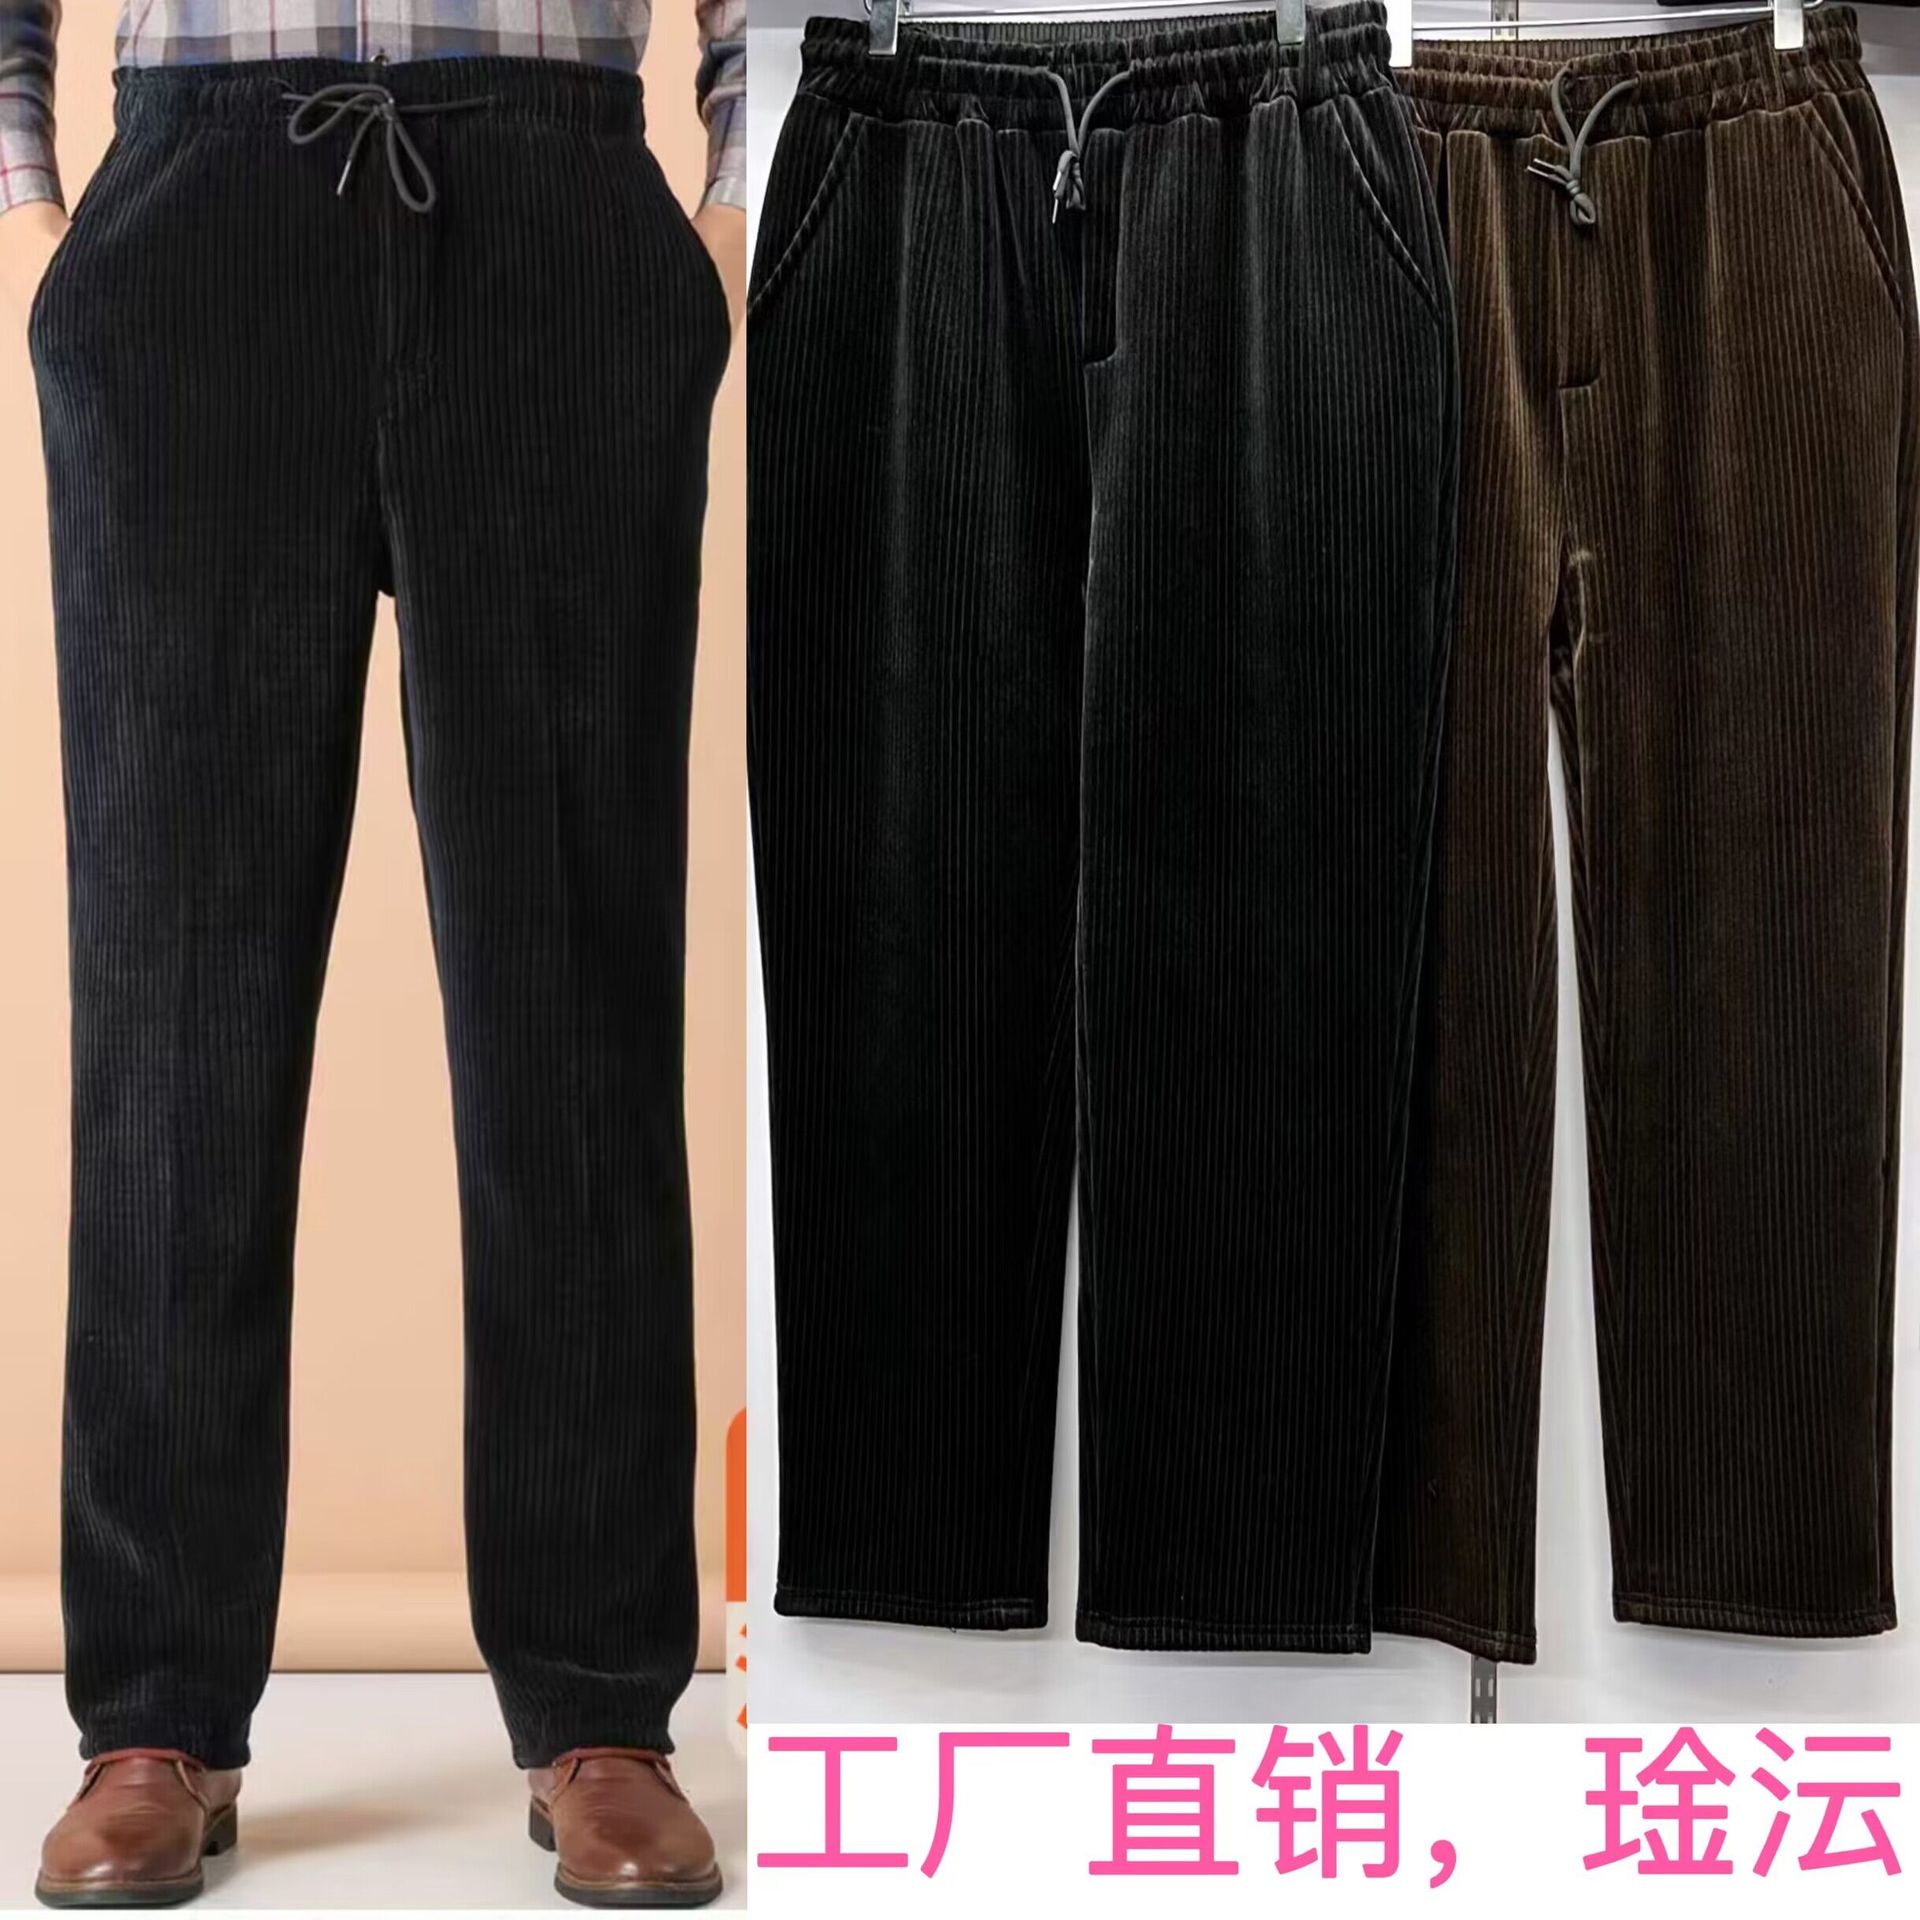 winter Men's trousers man Casual pants corduroy Men's trousers business affairs leisure time Middle and old age trousers Plush thickening factory